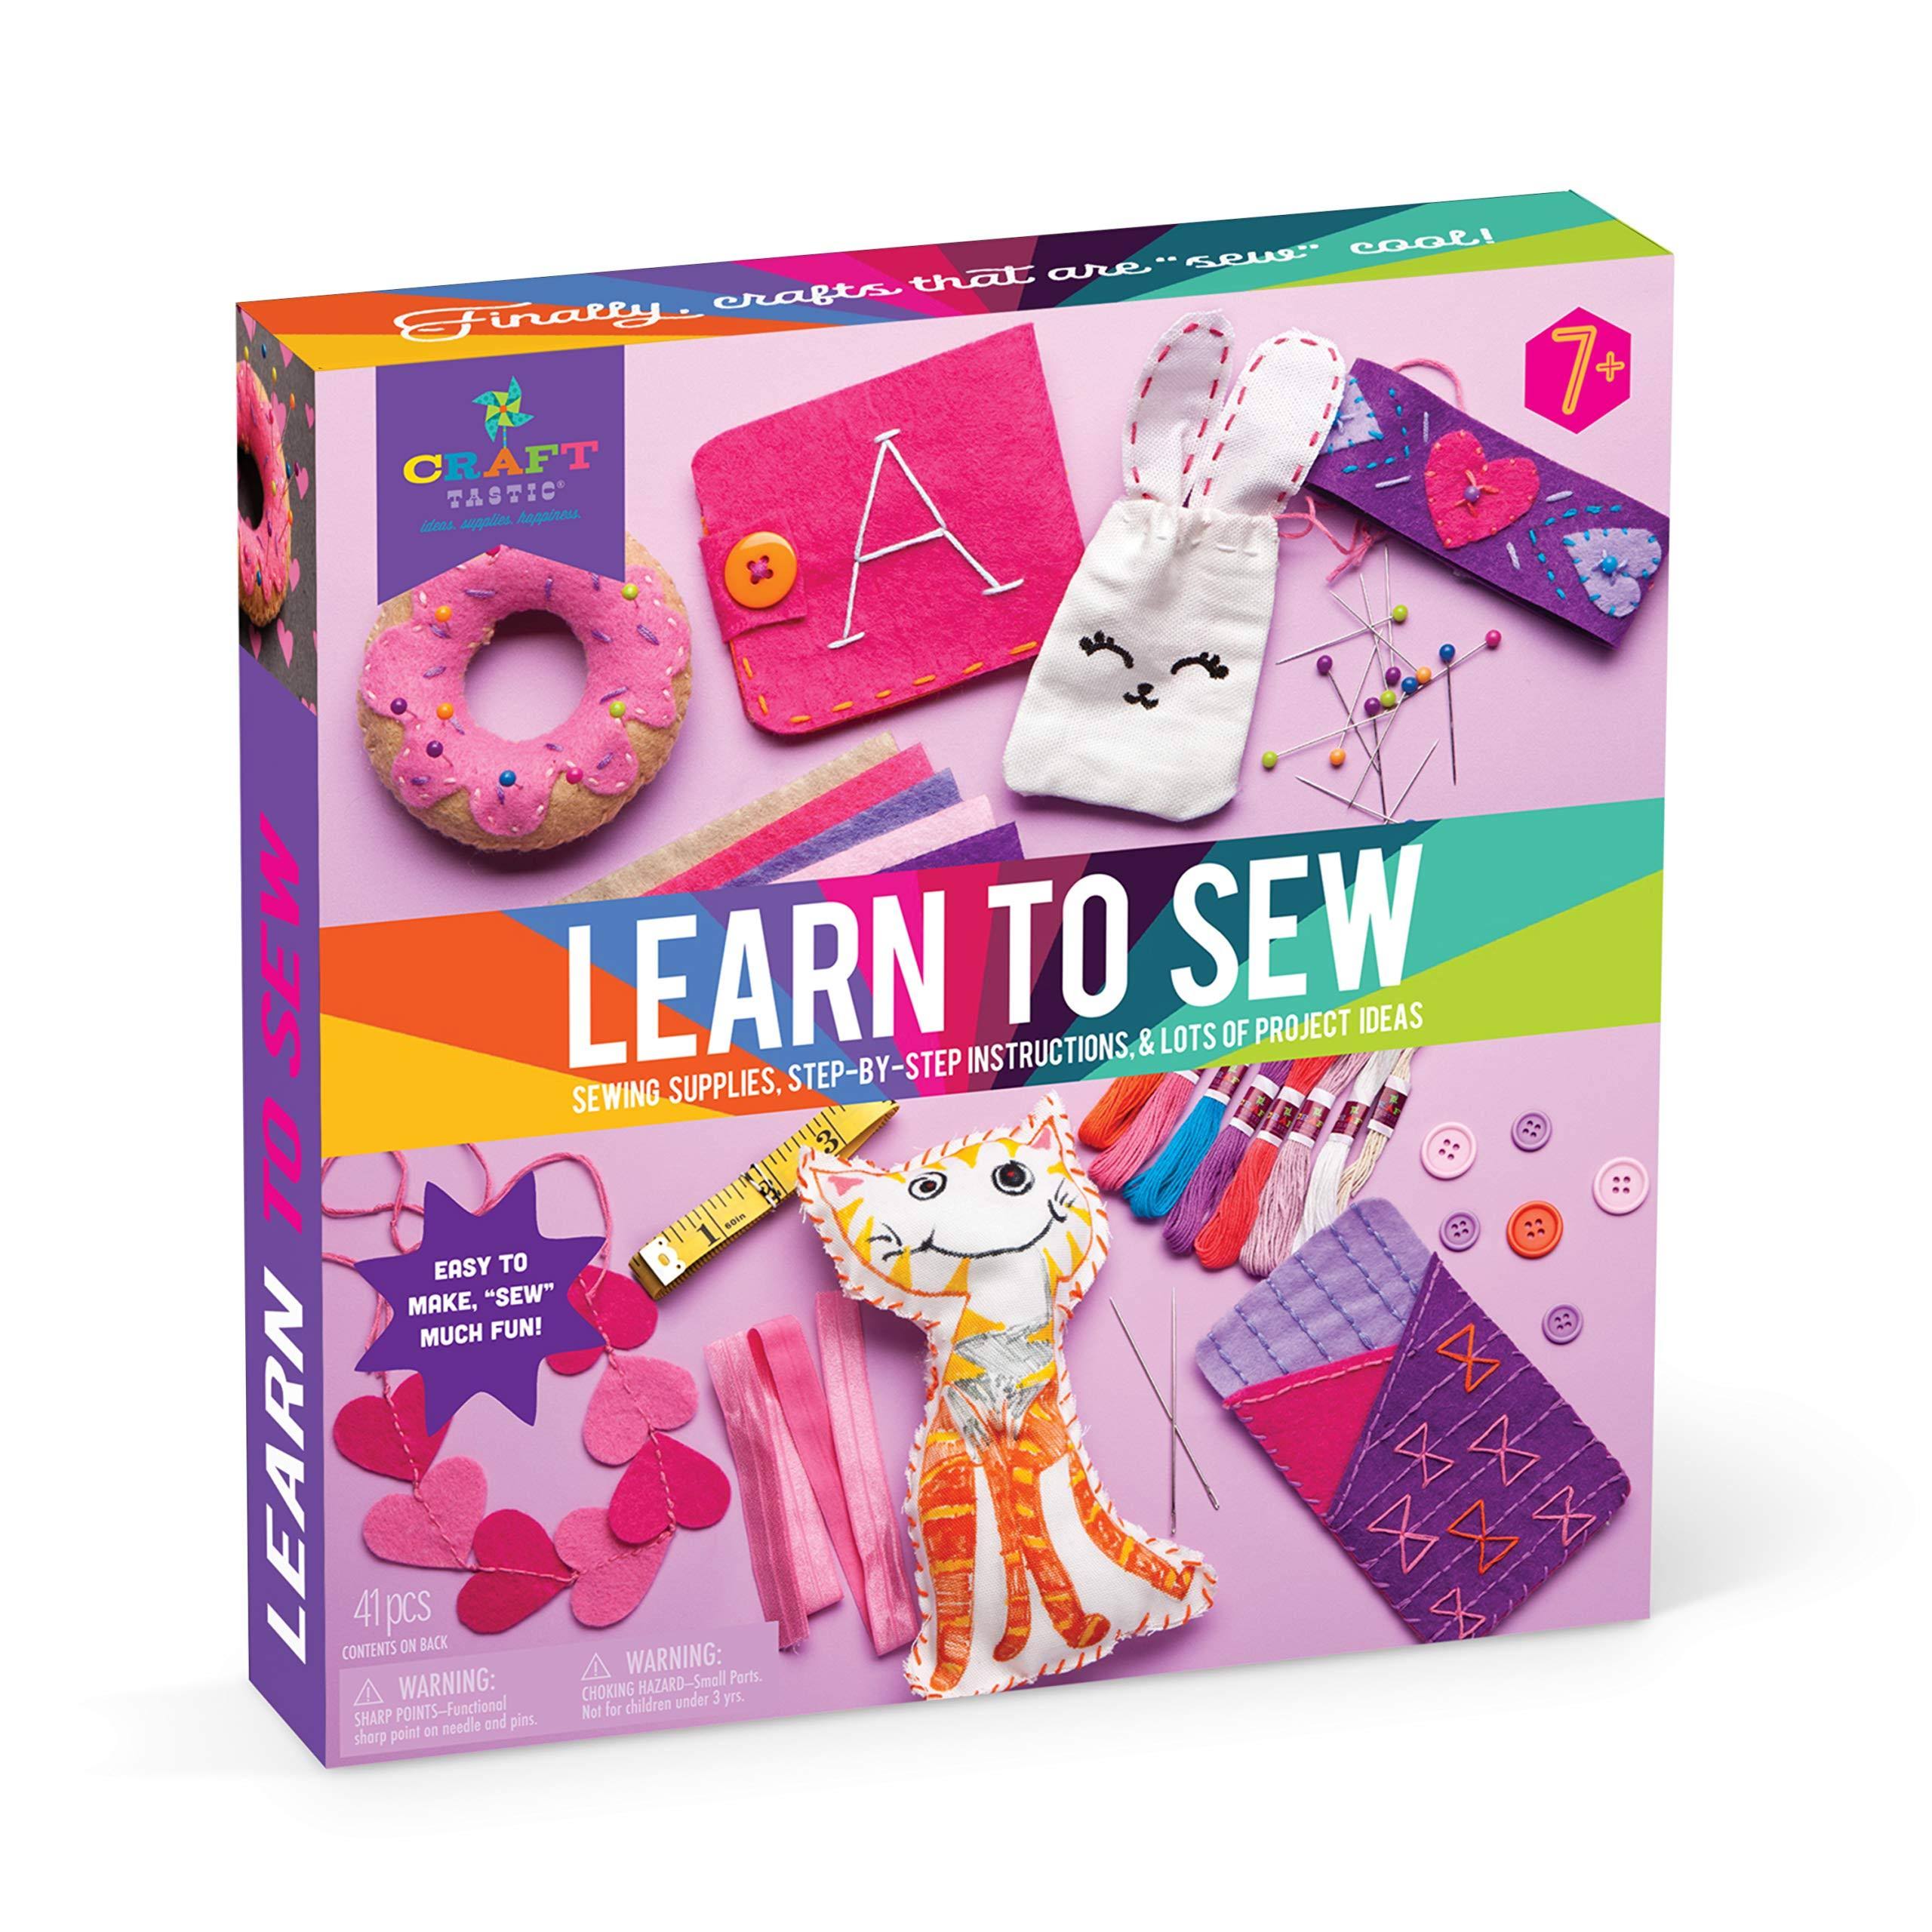 Craft-tastic Learn to Sew Kit Craft Kit Includes 7 Fun Projects, 34